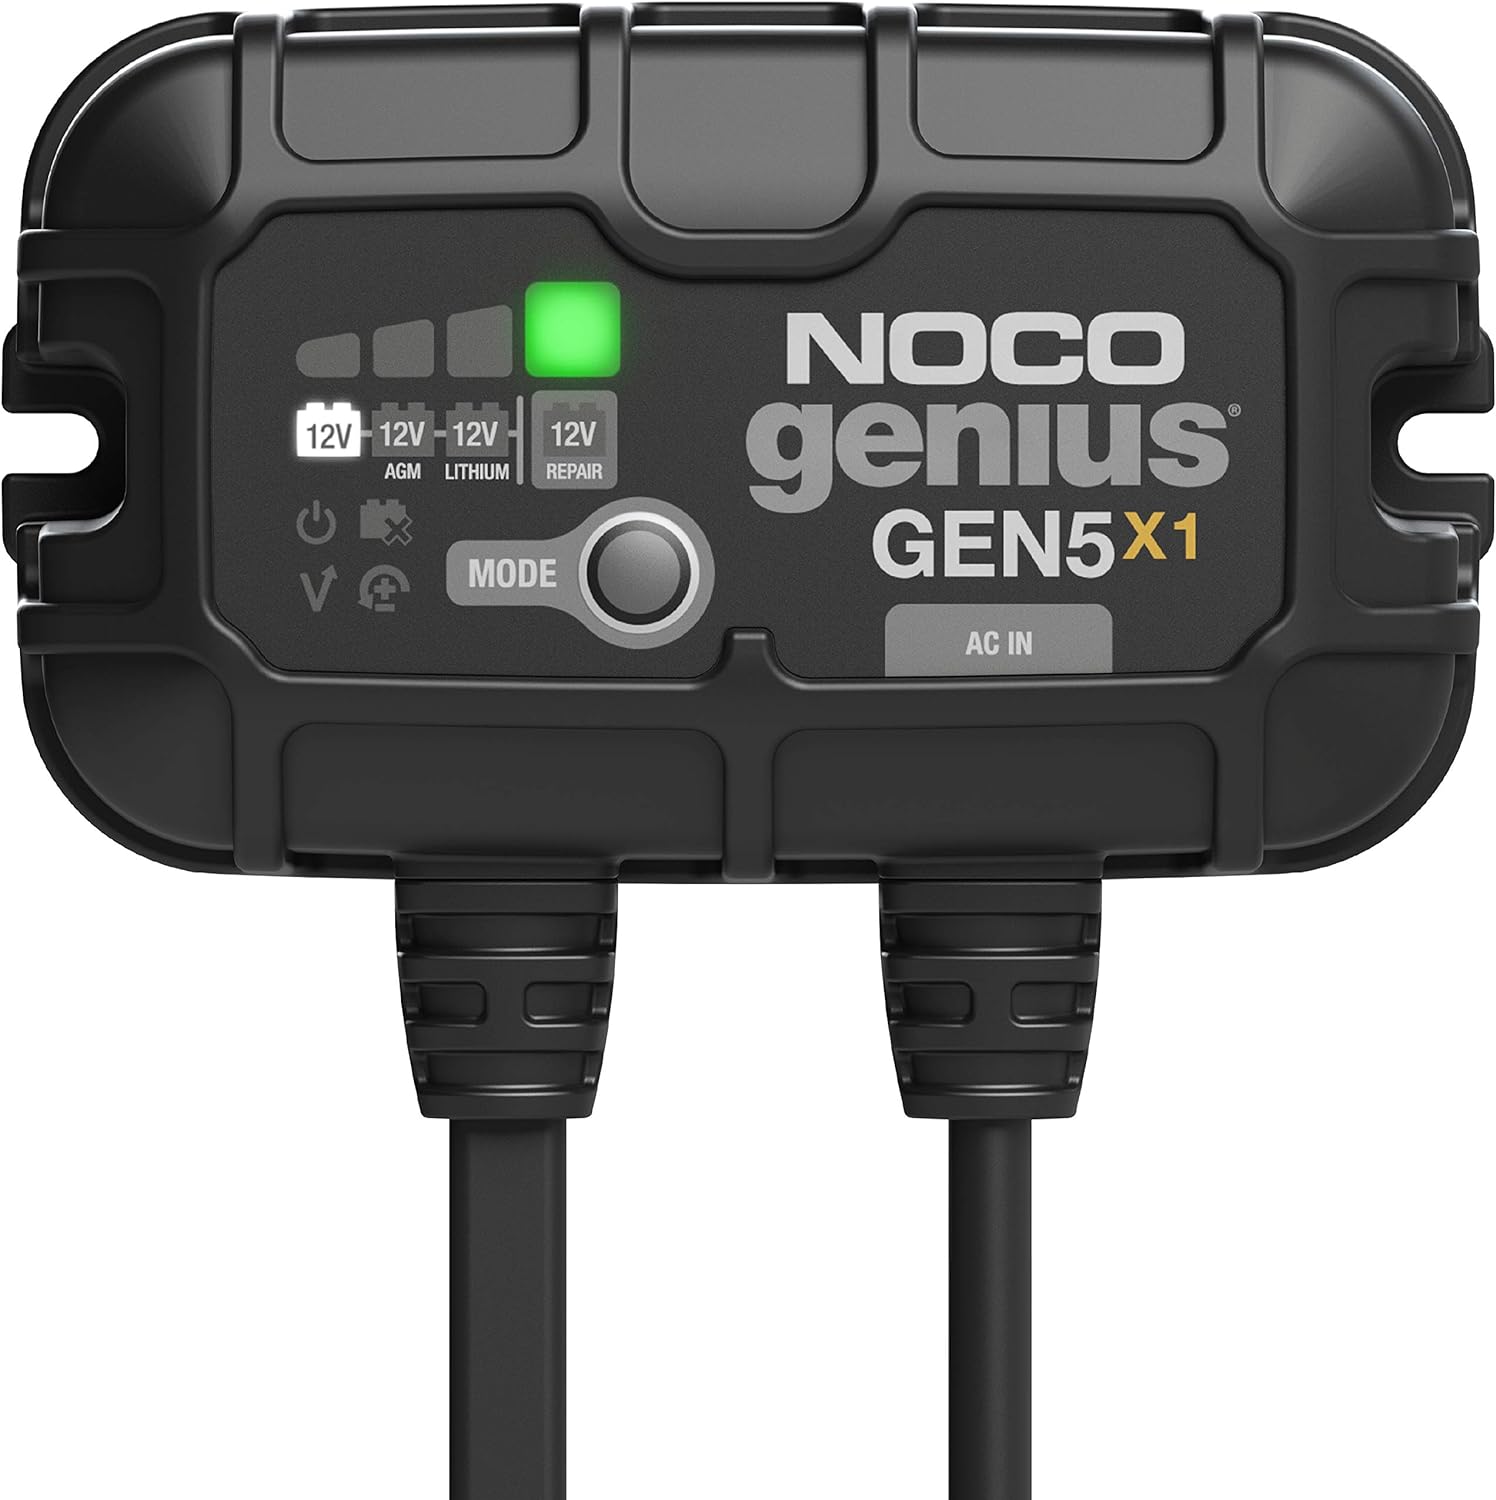 NOCO Genius GEN5X1, 1-Bank, 5A (5A/Bank) Smart Marine Battery Charger, 12V Waterproof Onboard Boat Charger, Maintainer and Desulfator for AGM, Lithium (LiFePO4) and Deep-Cycle Batteries - NOCO Genius GEN5X1 Battery Charger Review